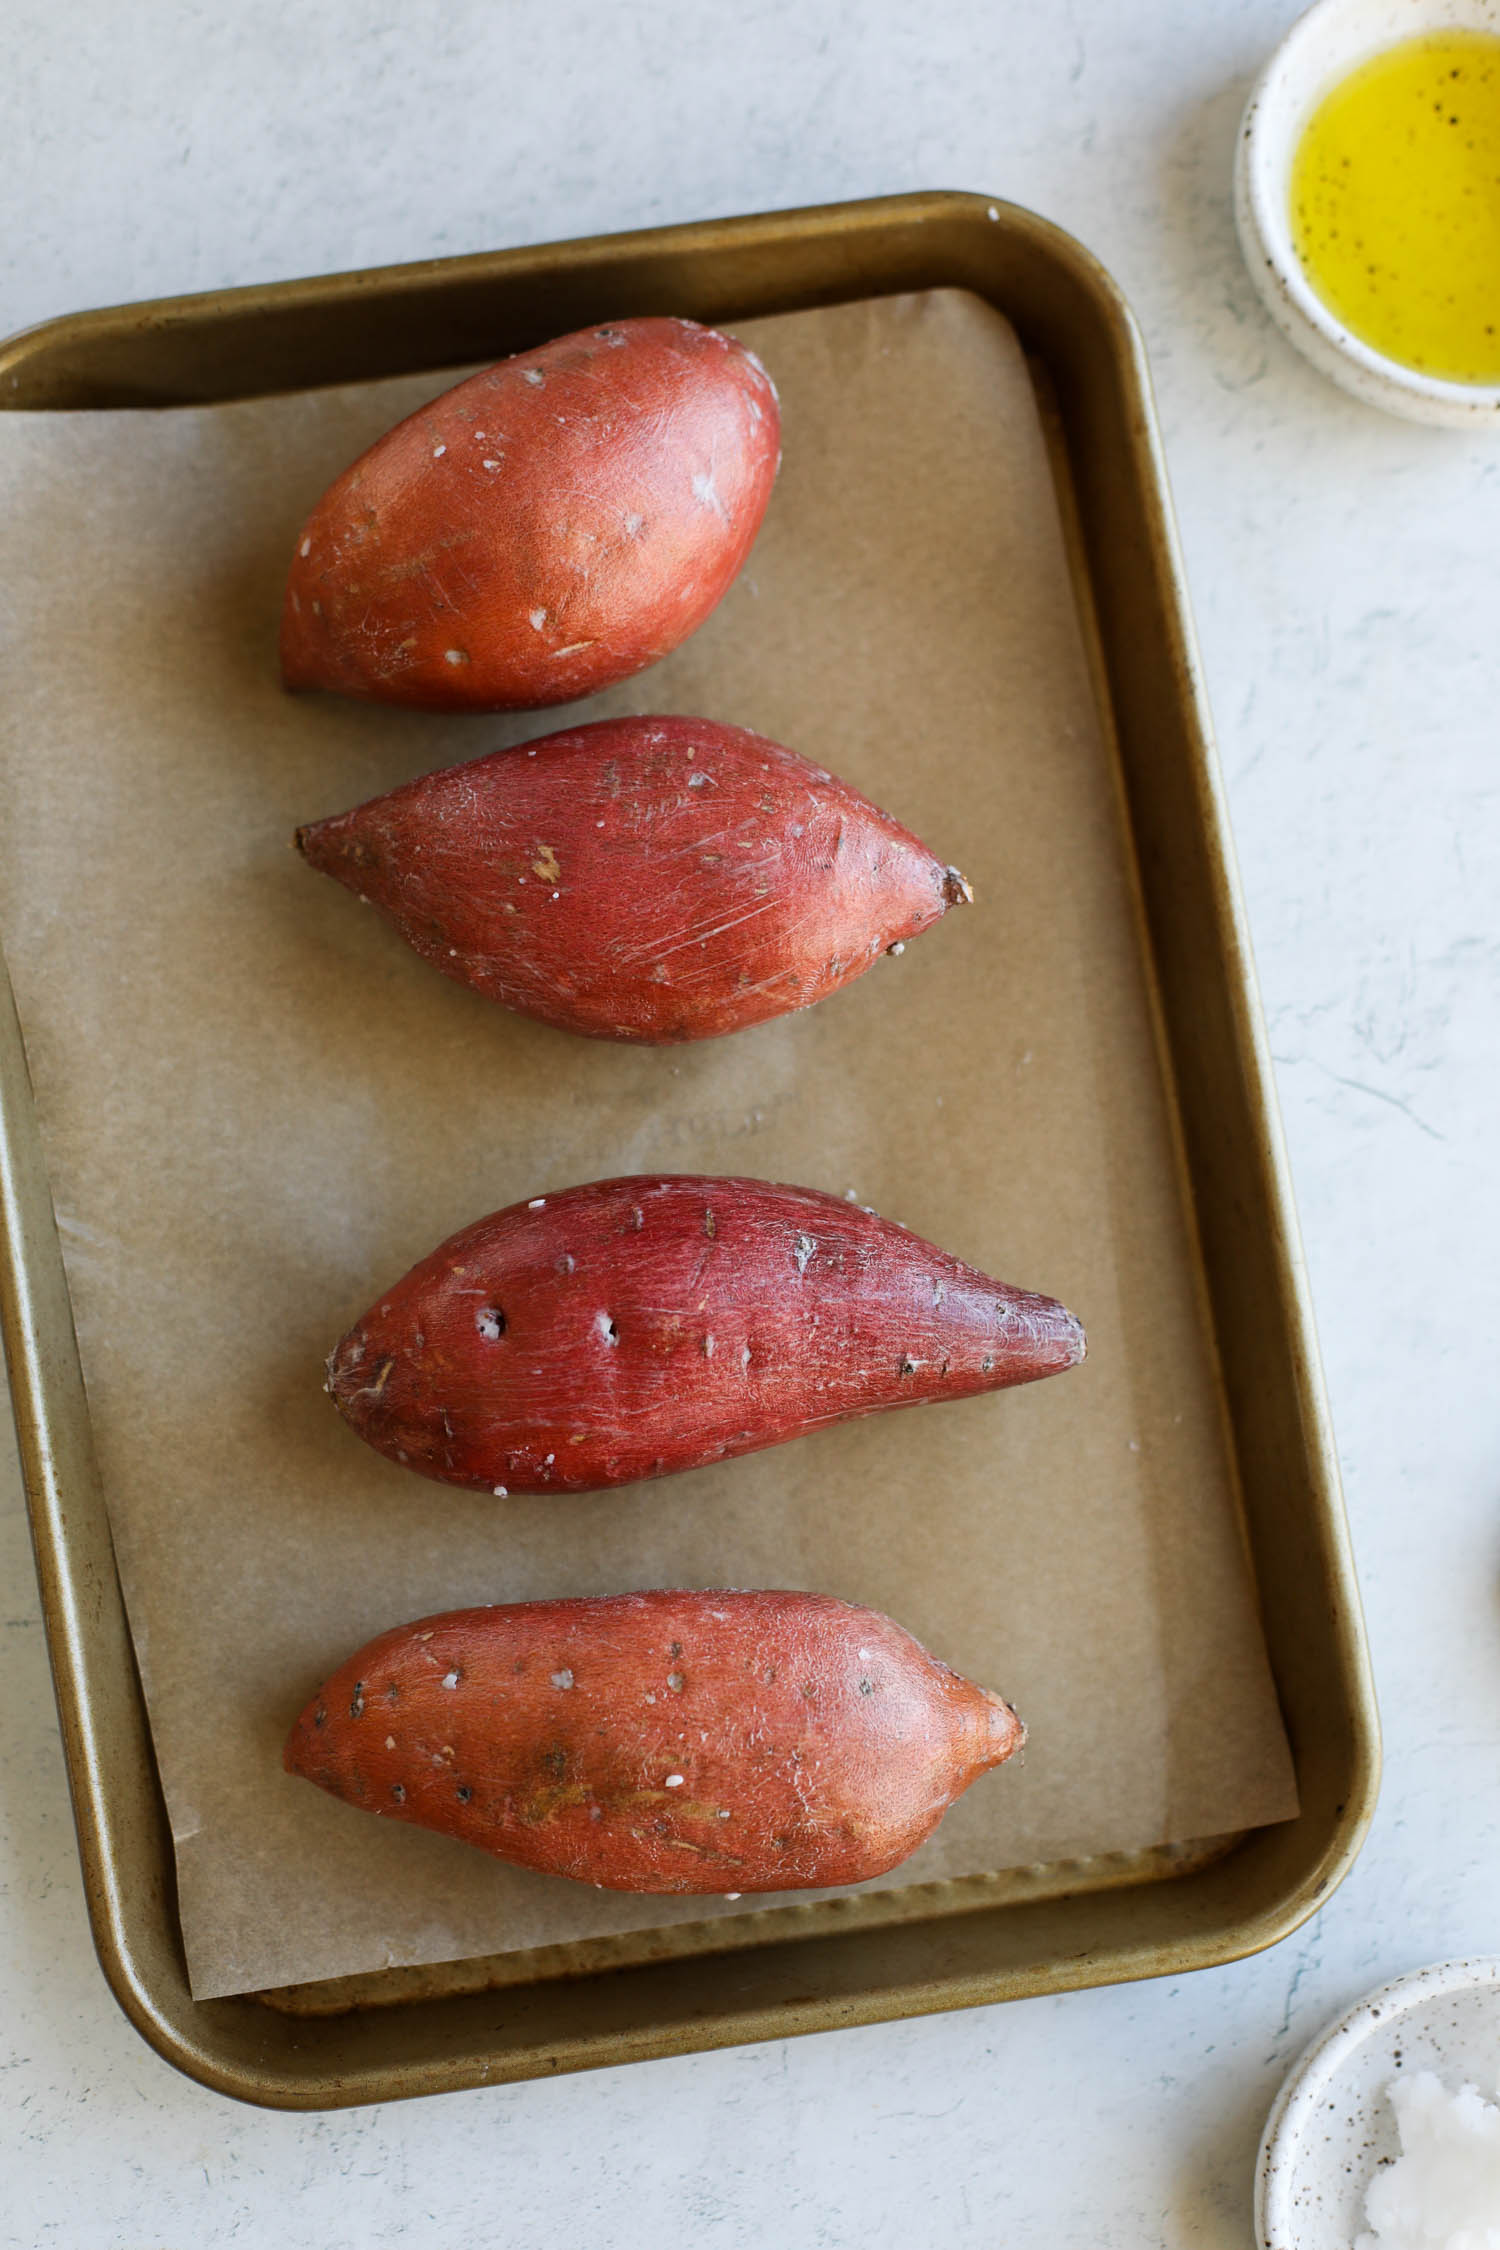 Four sweet potatoes rubbed with oil and flaky sea salt on parchment lined baking sheet.